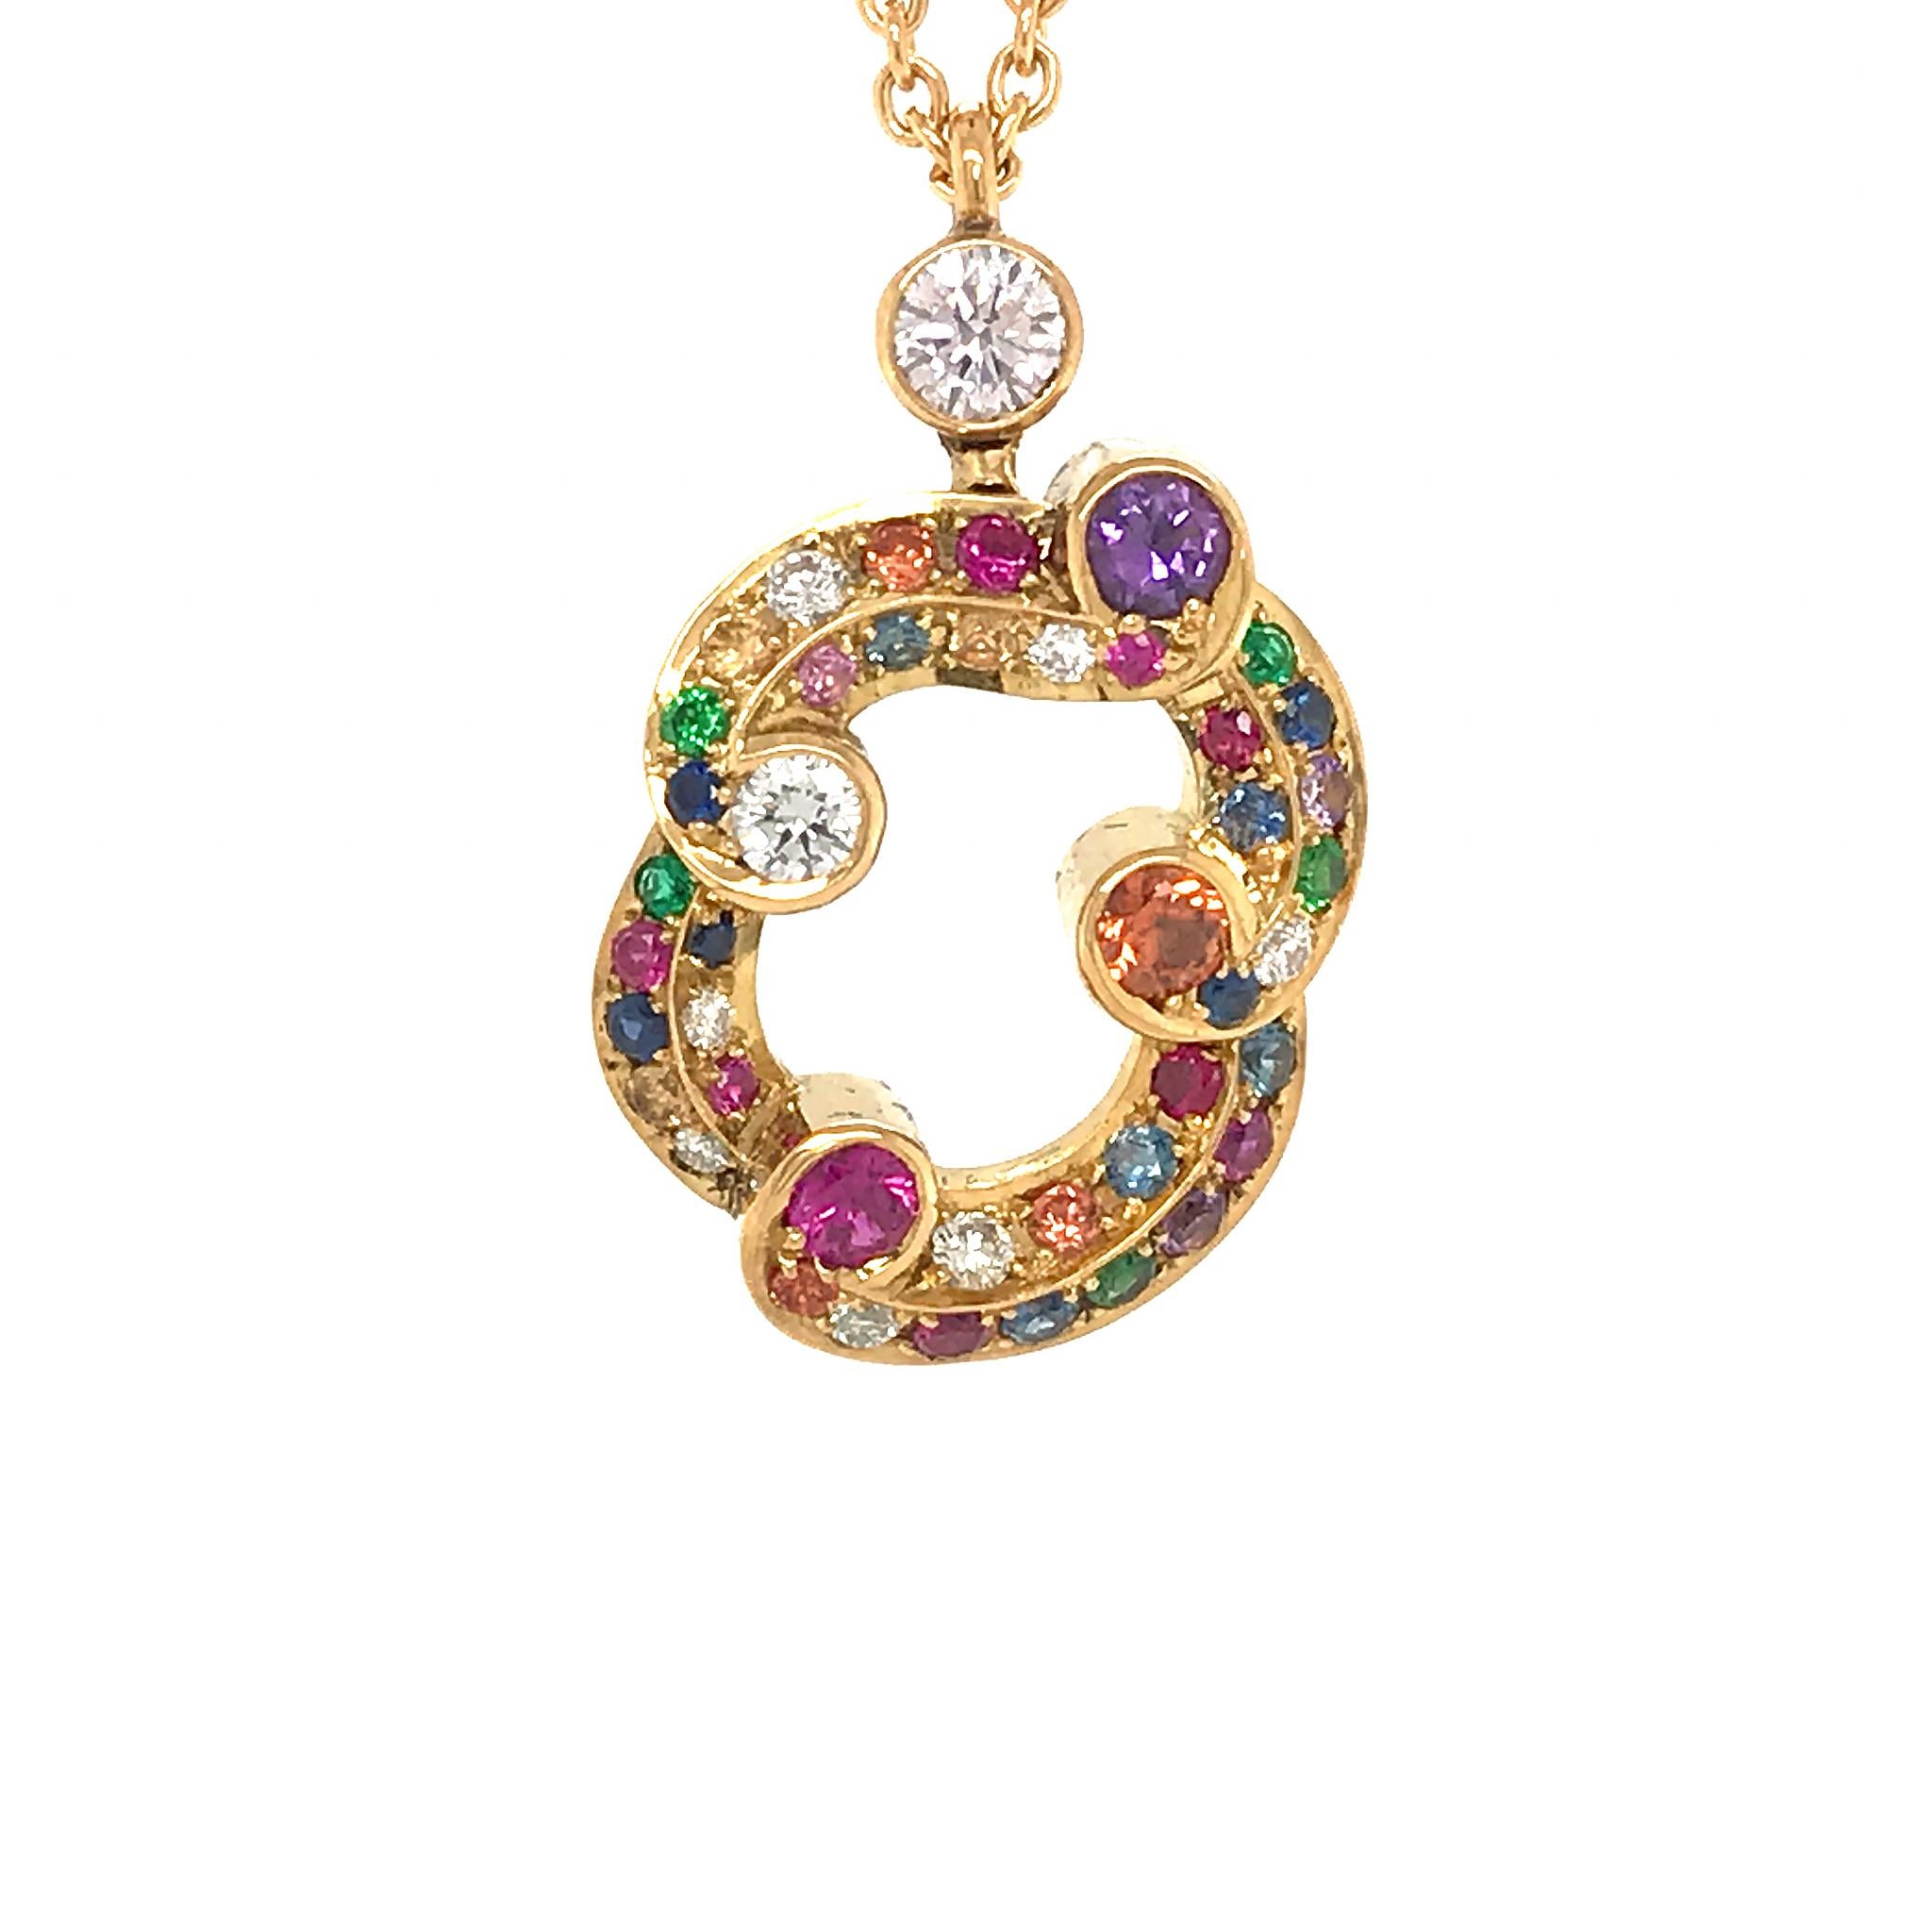 Modern Fabergé Rococo 18 Karat Yellow Gold Multicolored Pendant Necklace In Excellent Condition For Sale In New York, NY